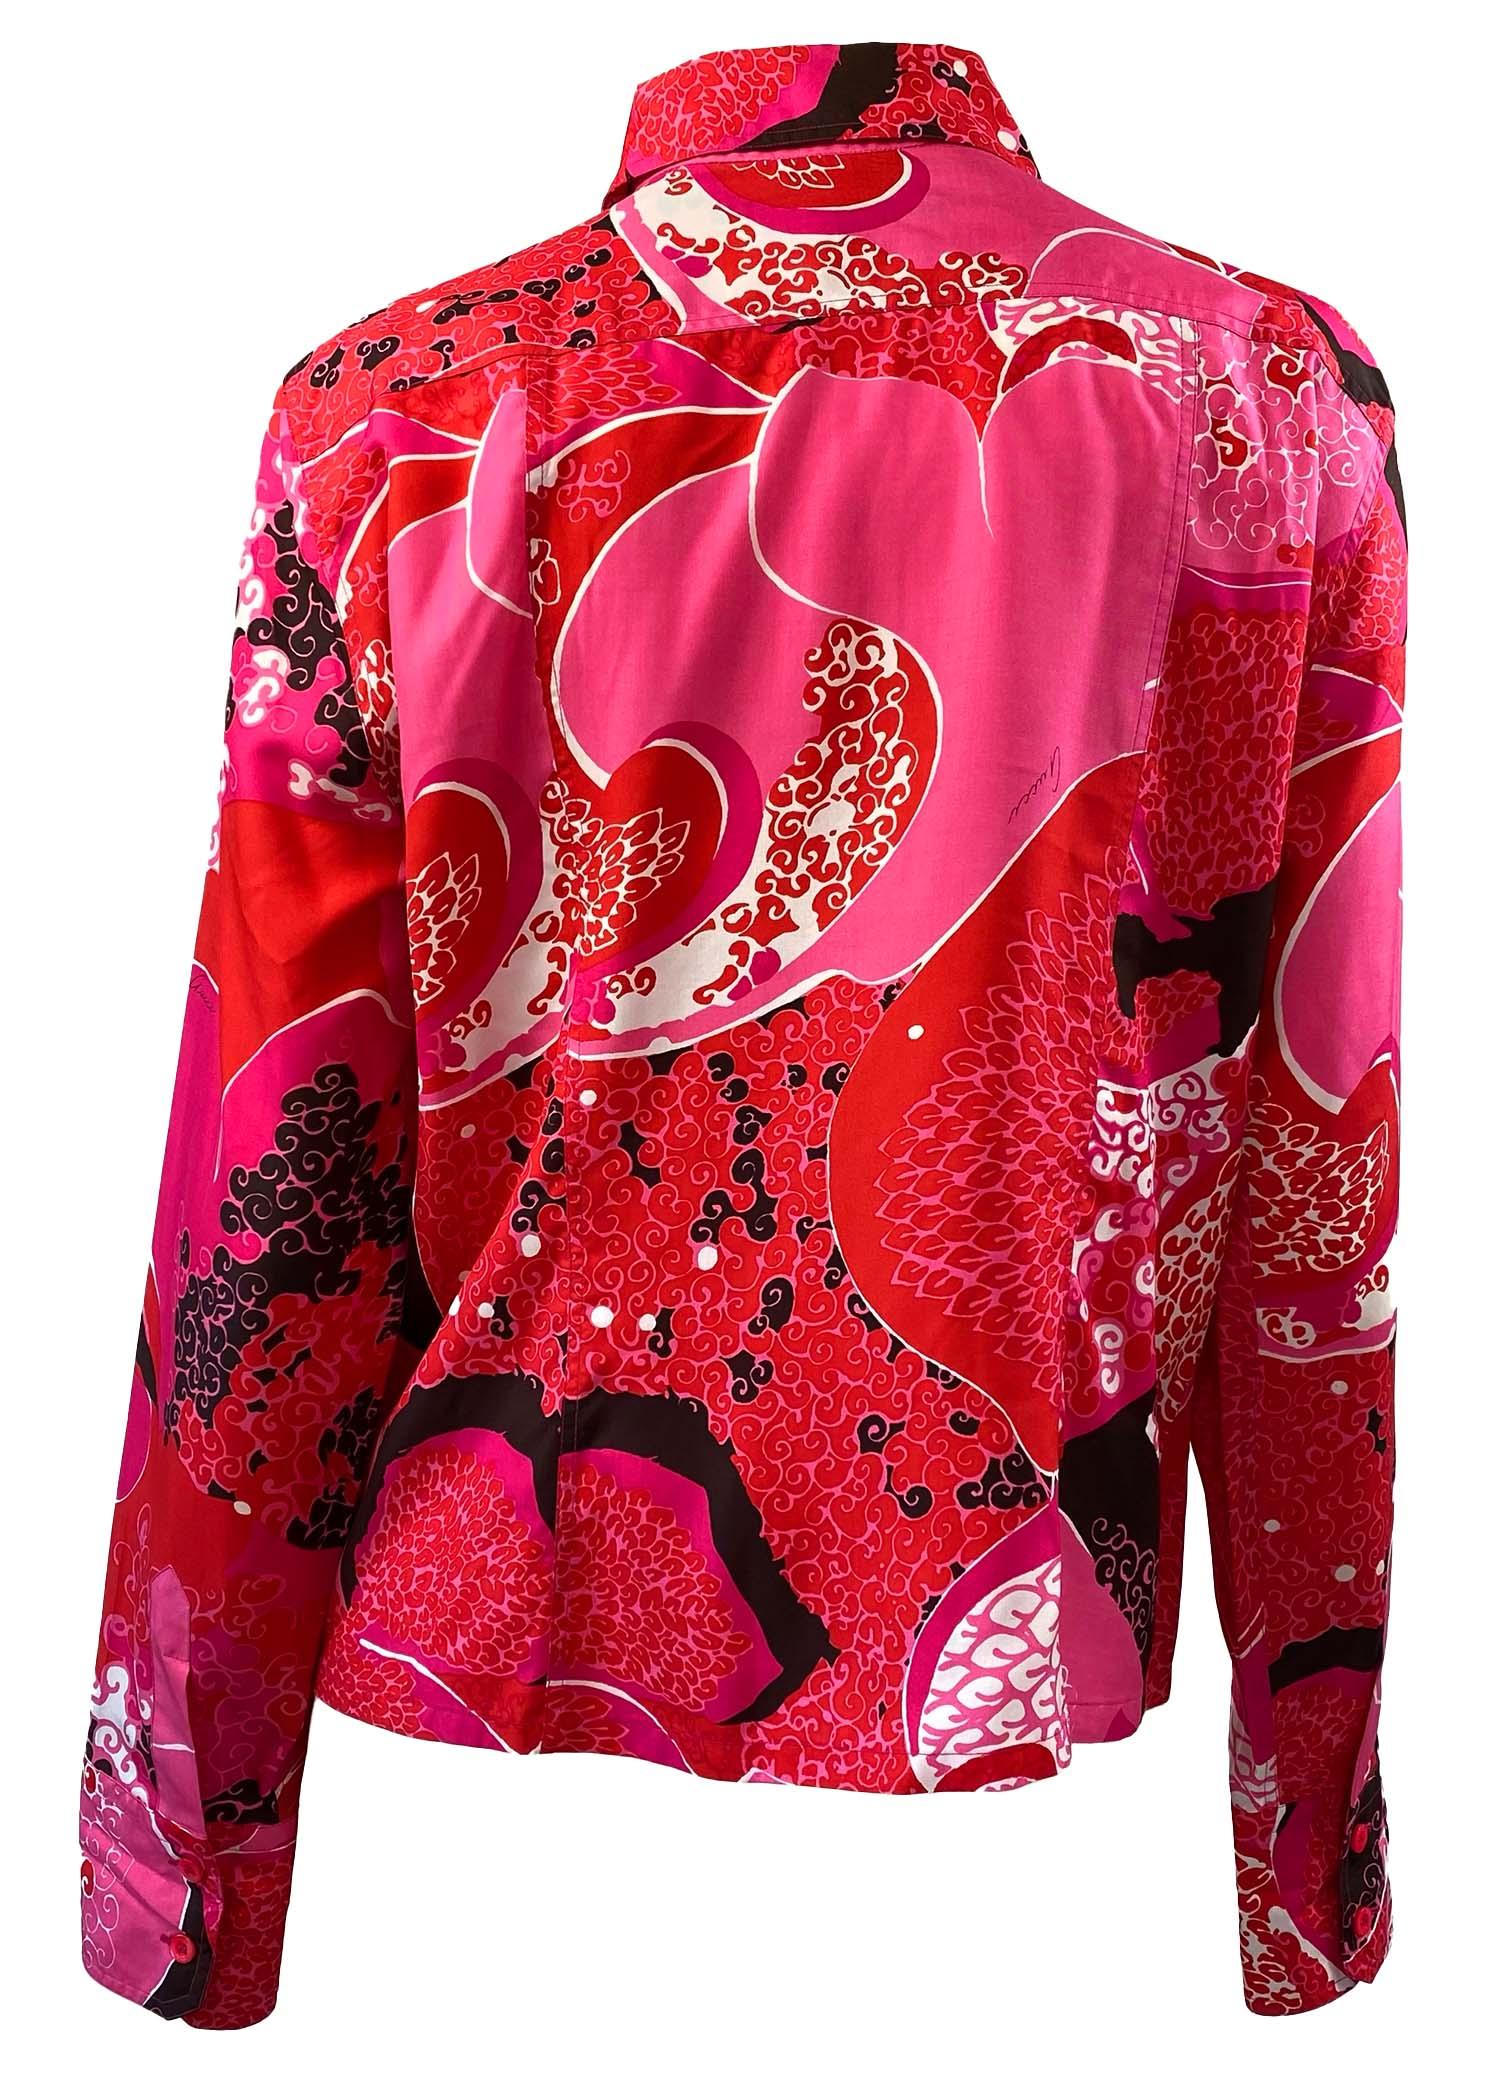 S/S 1999 Gucci by Tom Ford Pink 'Acid Flower' Print Silk Button-Up Blouse  In Good Condition For Sale In West Hollywood, CA